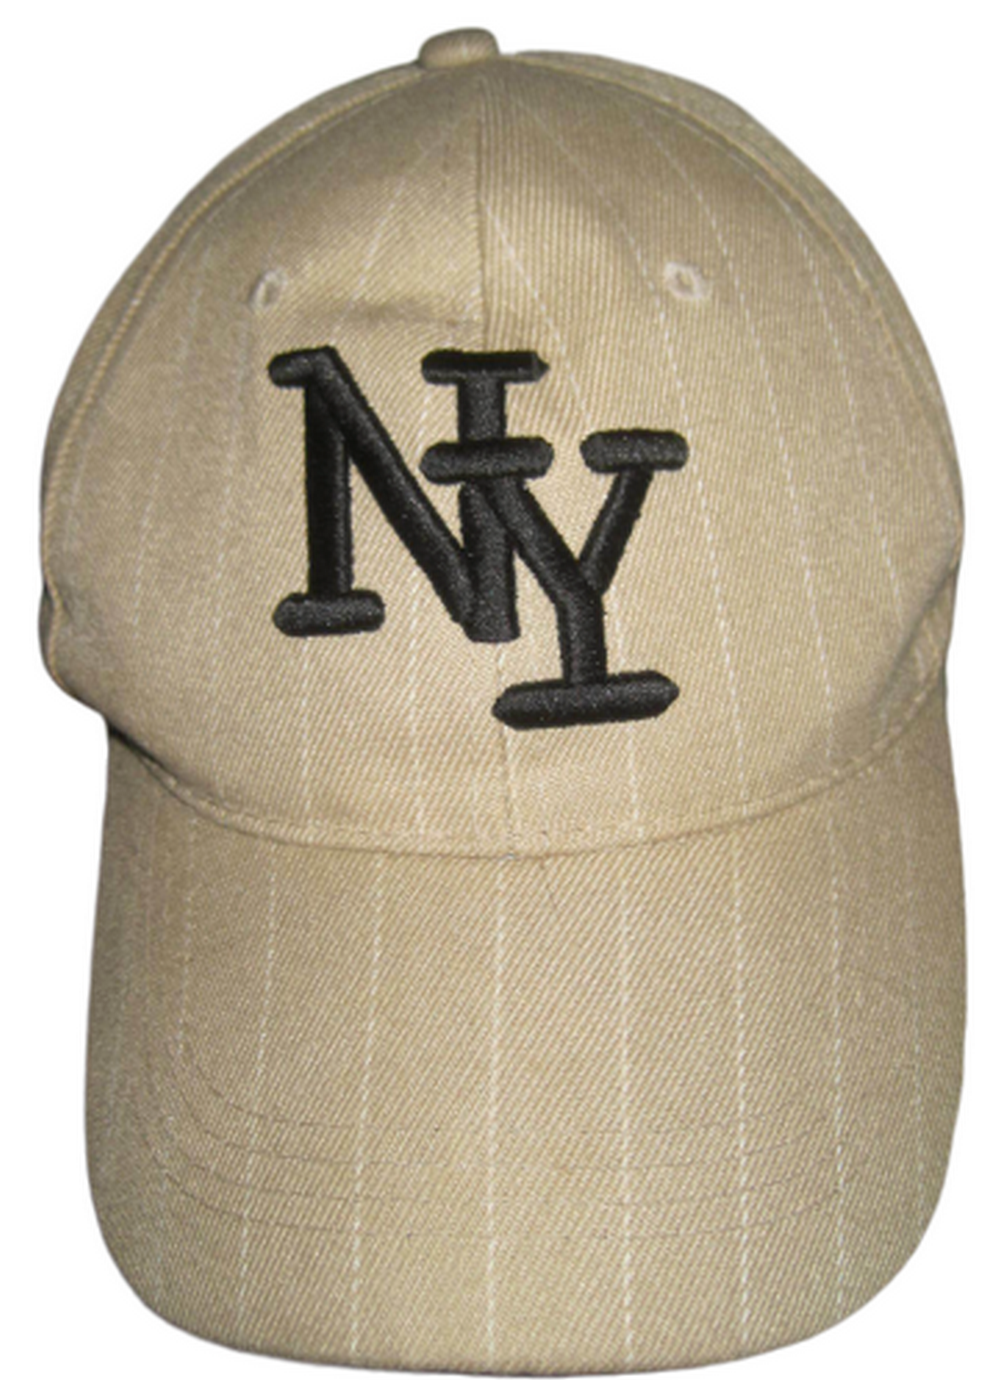 Primary image for Ballcap Unisex Adult Adjustable NEW YORK souvenir embroidered wool acrylic